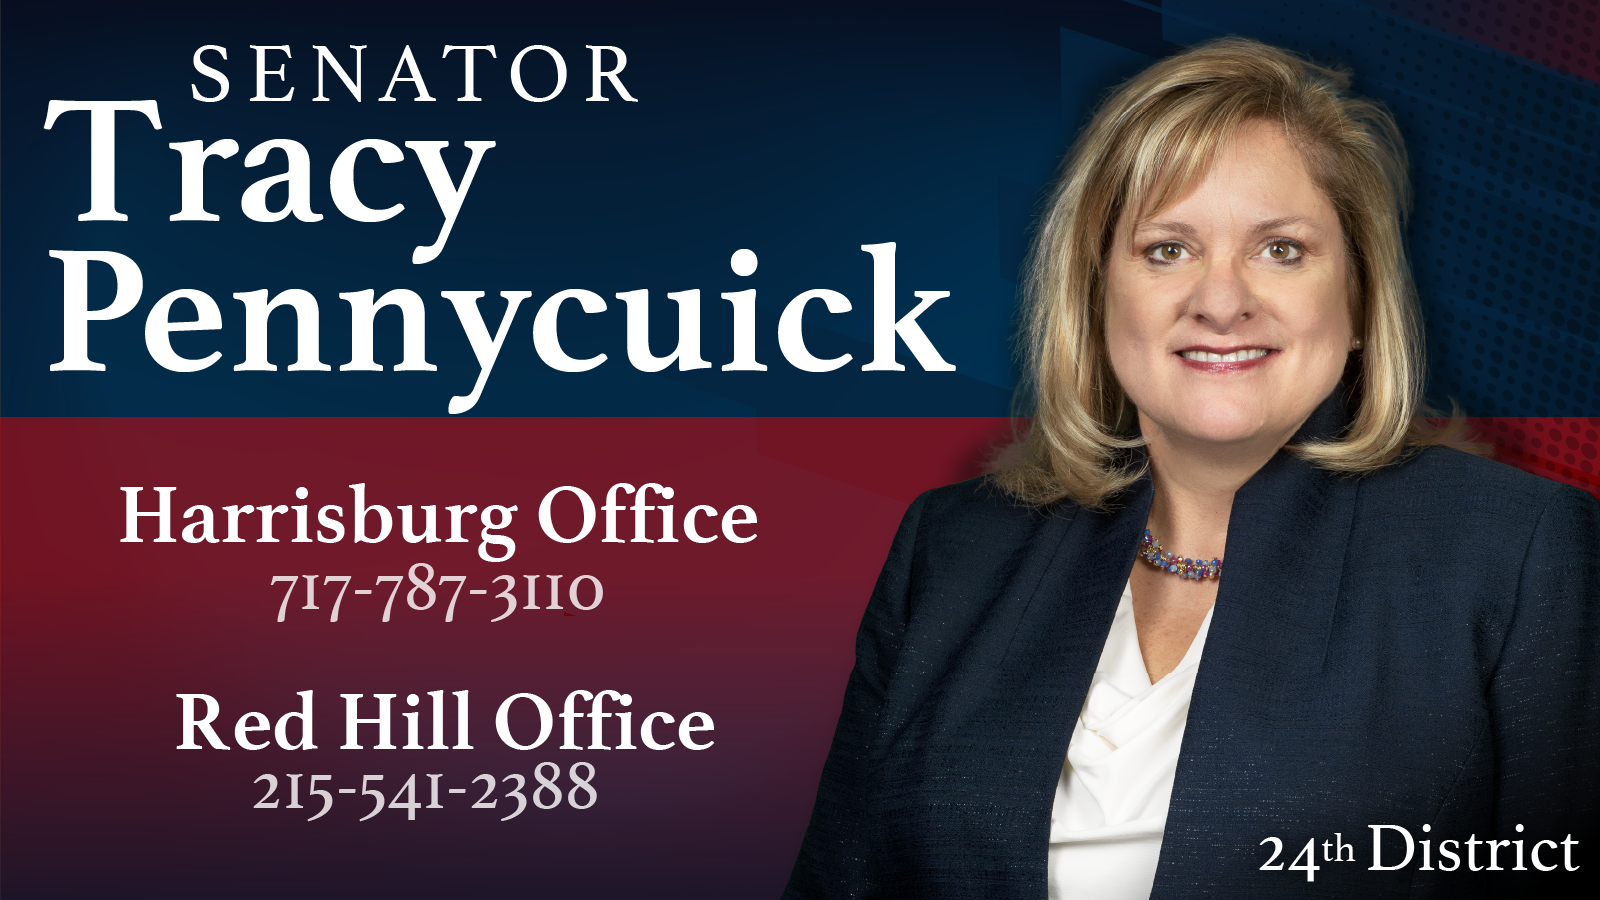 State Senator Tracy Pennycuick